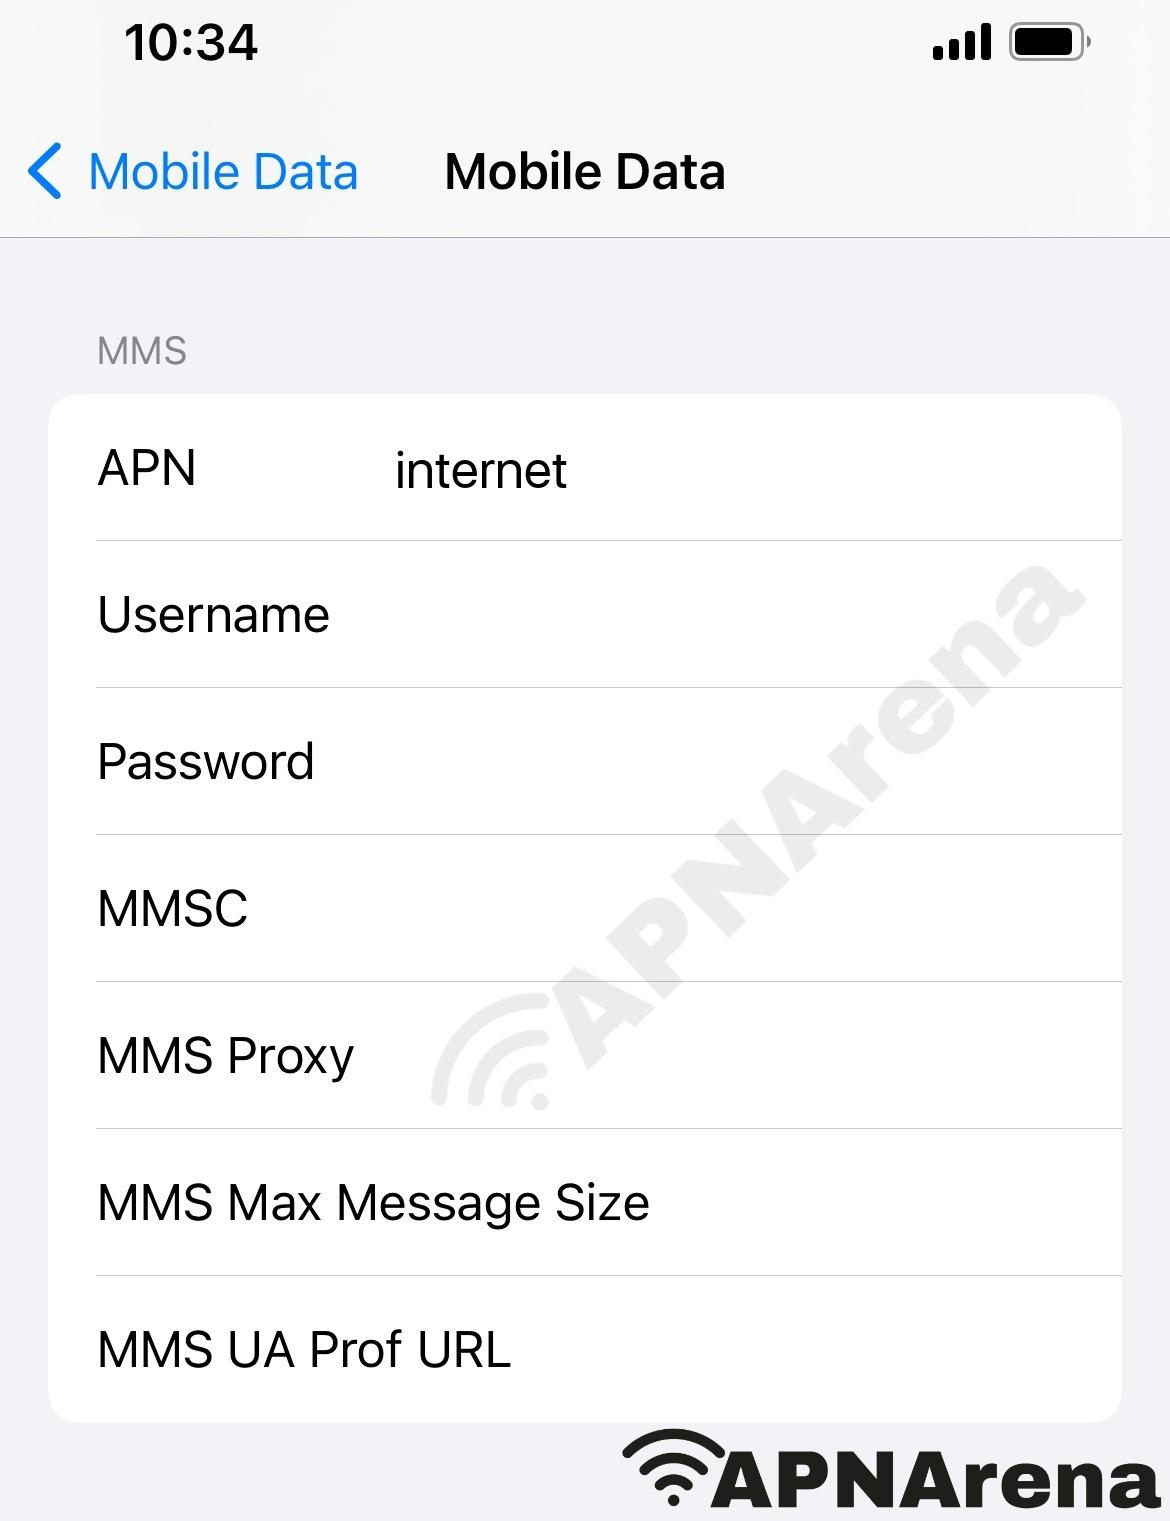 Kcell MMS Settings for iPhone